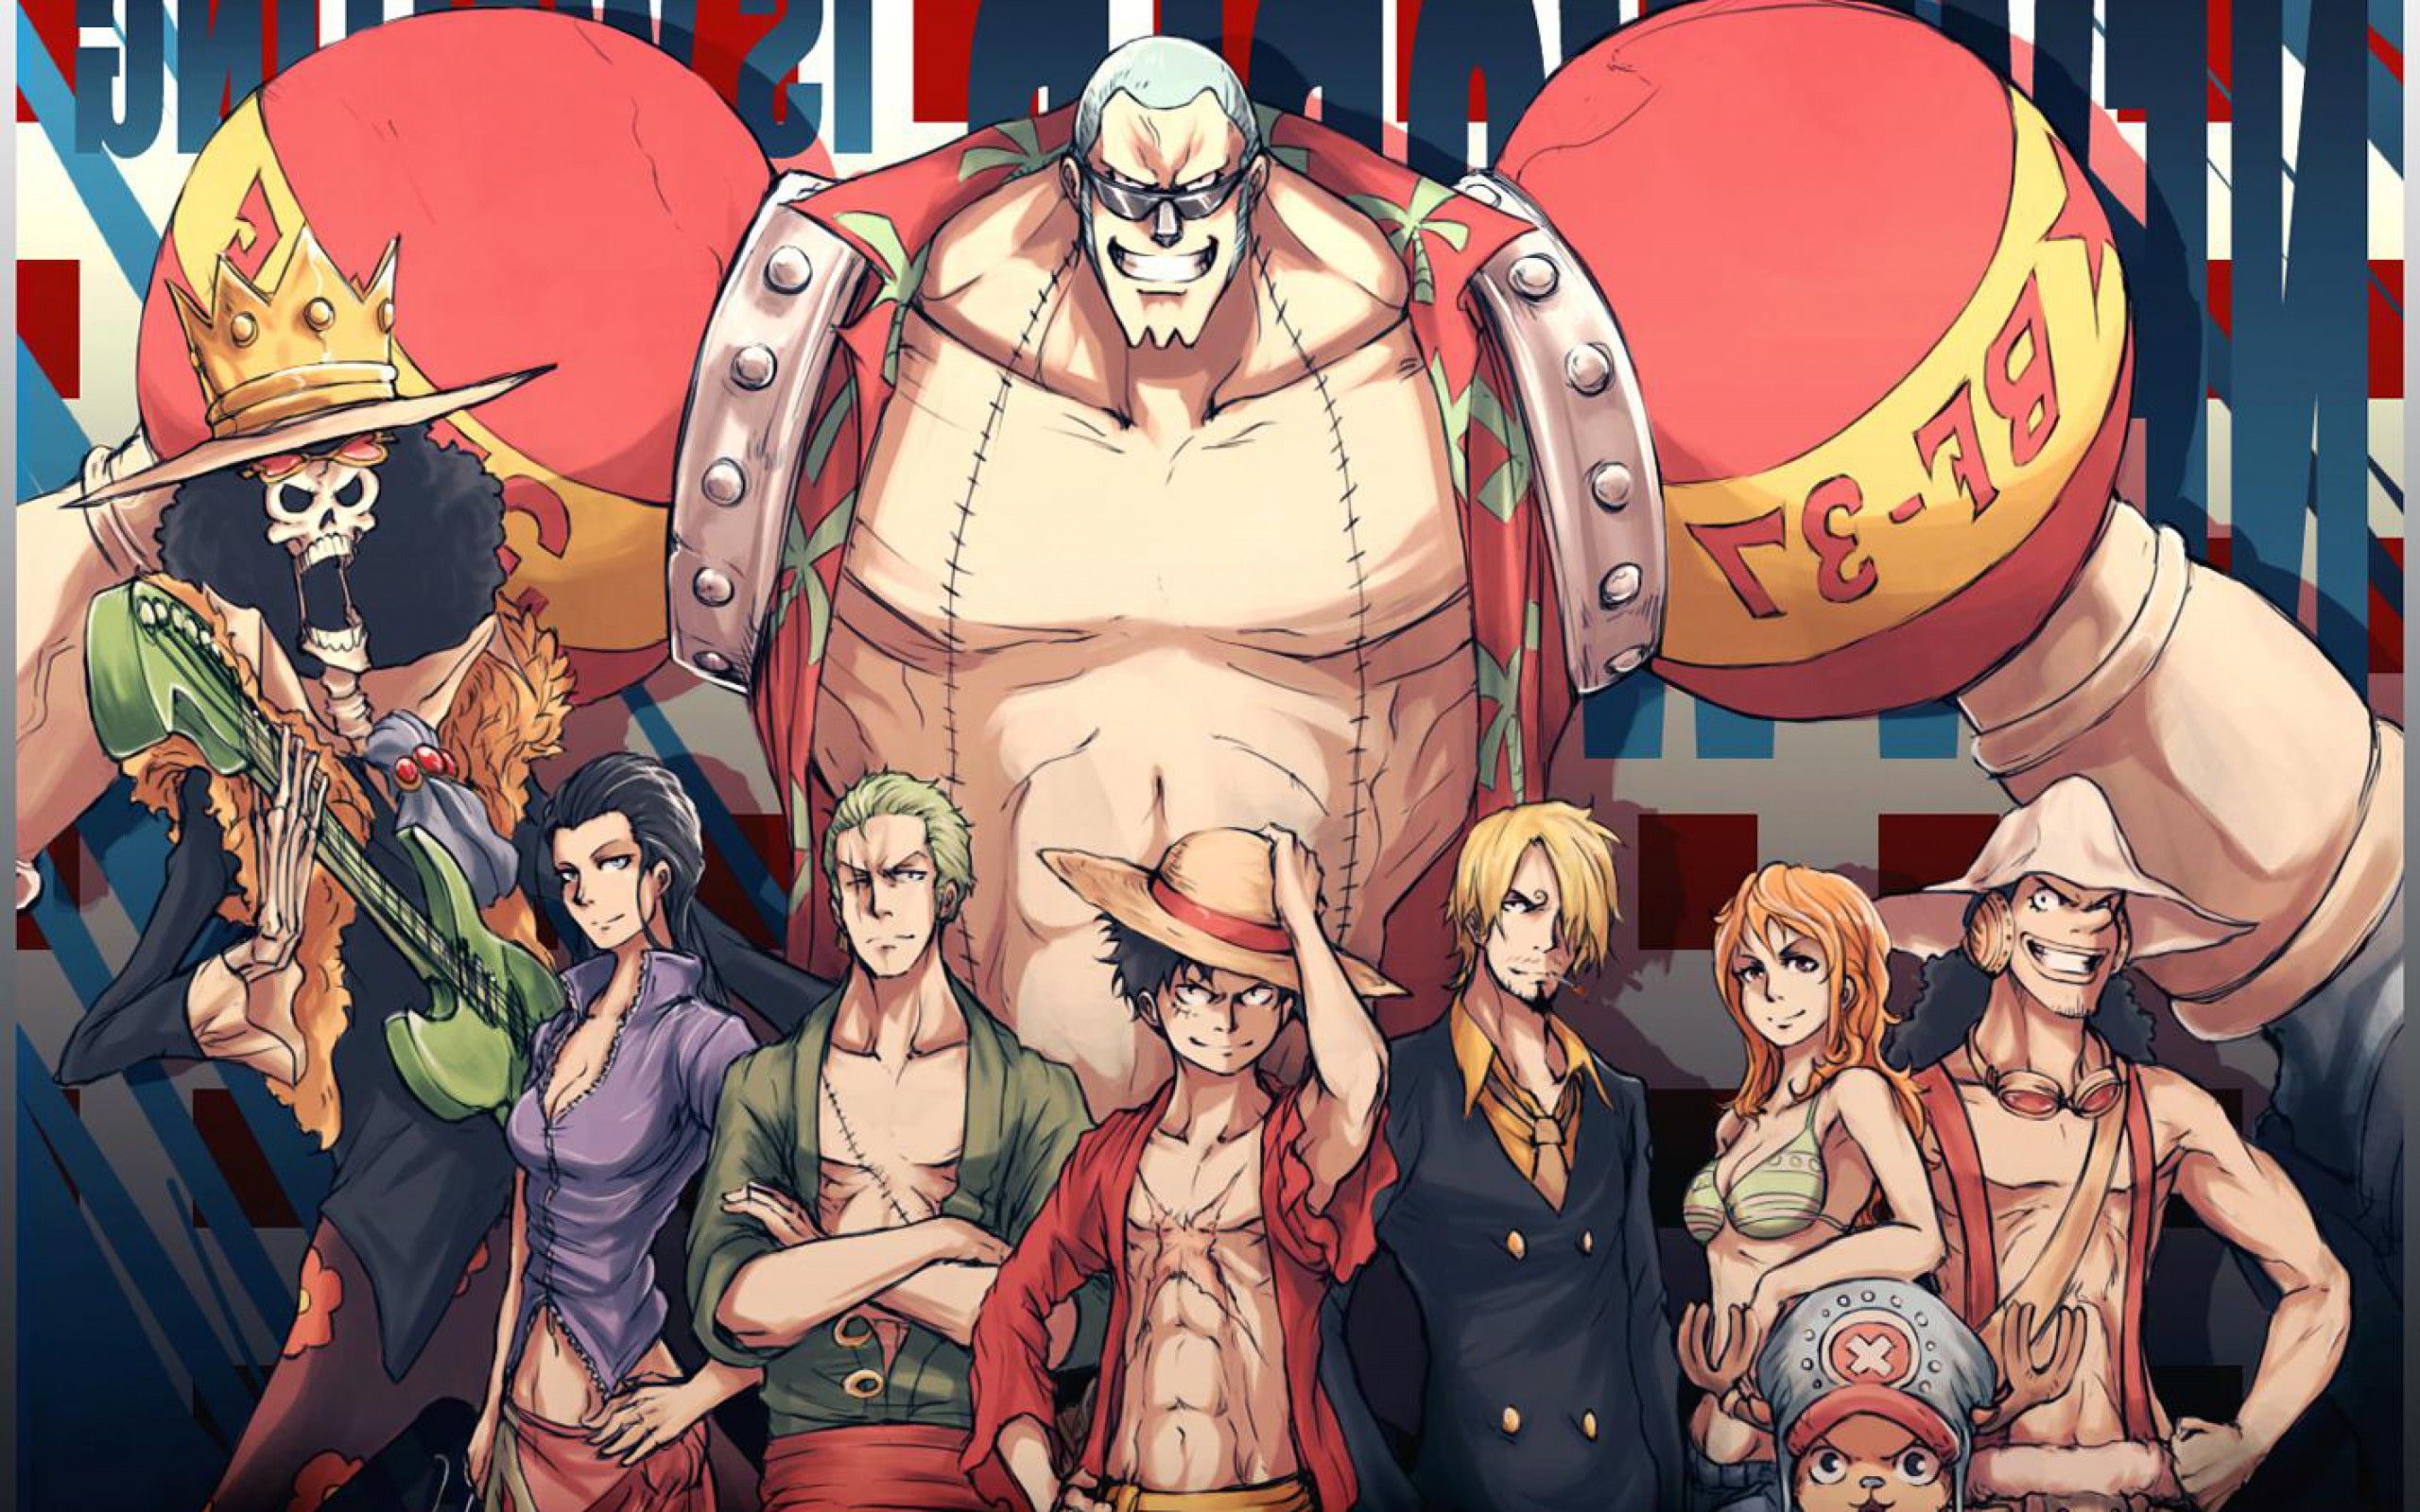 1366 X 768 One Piece Wallpapers